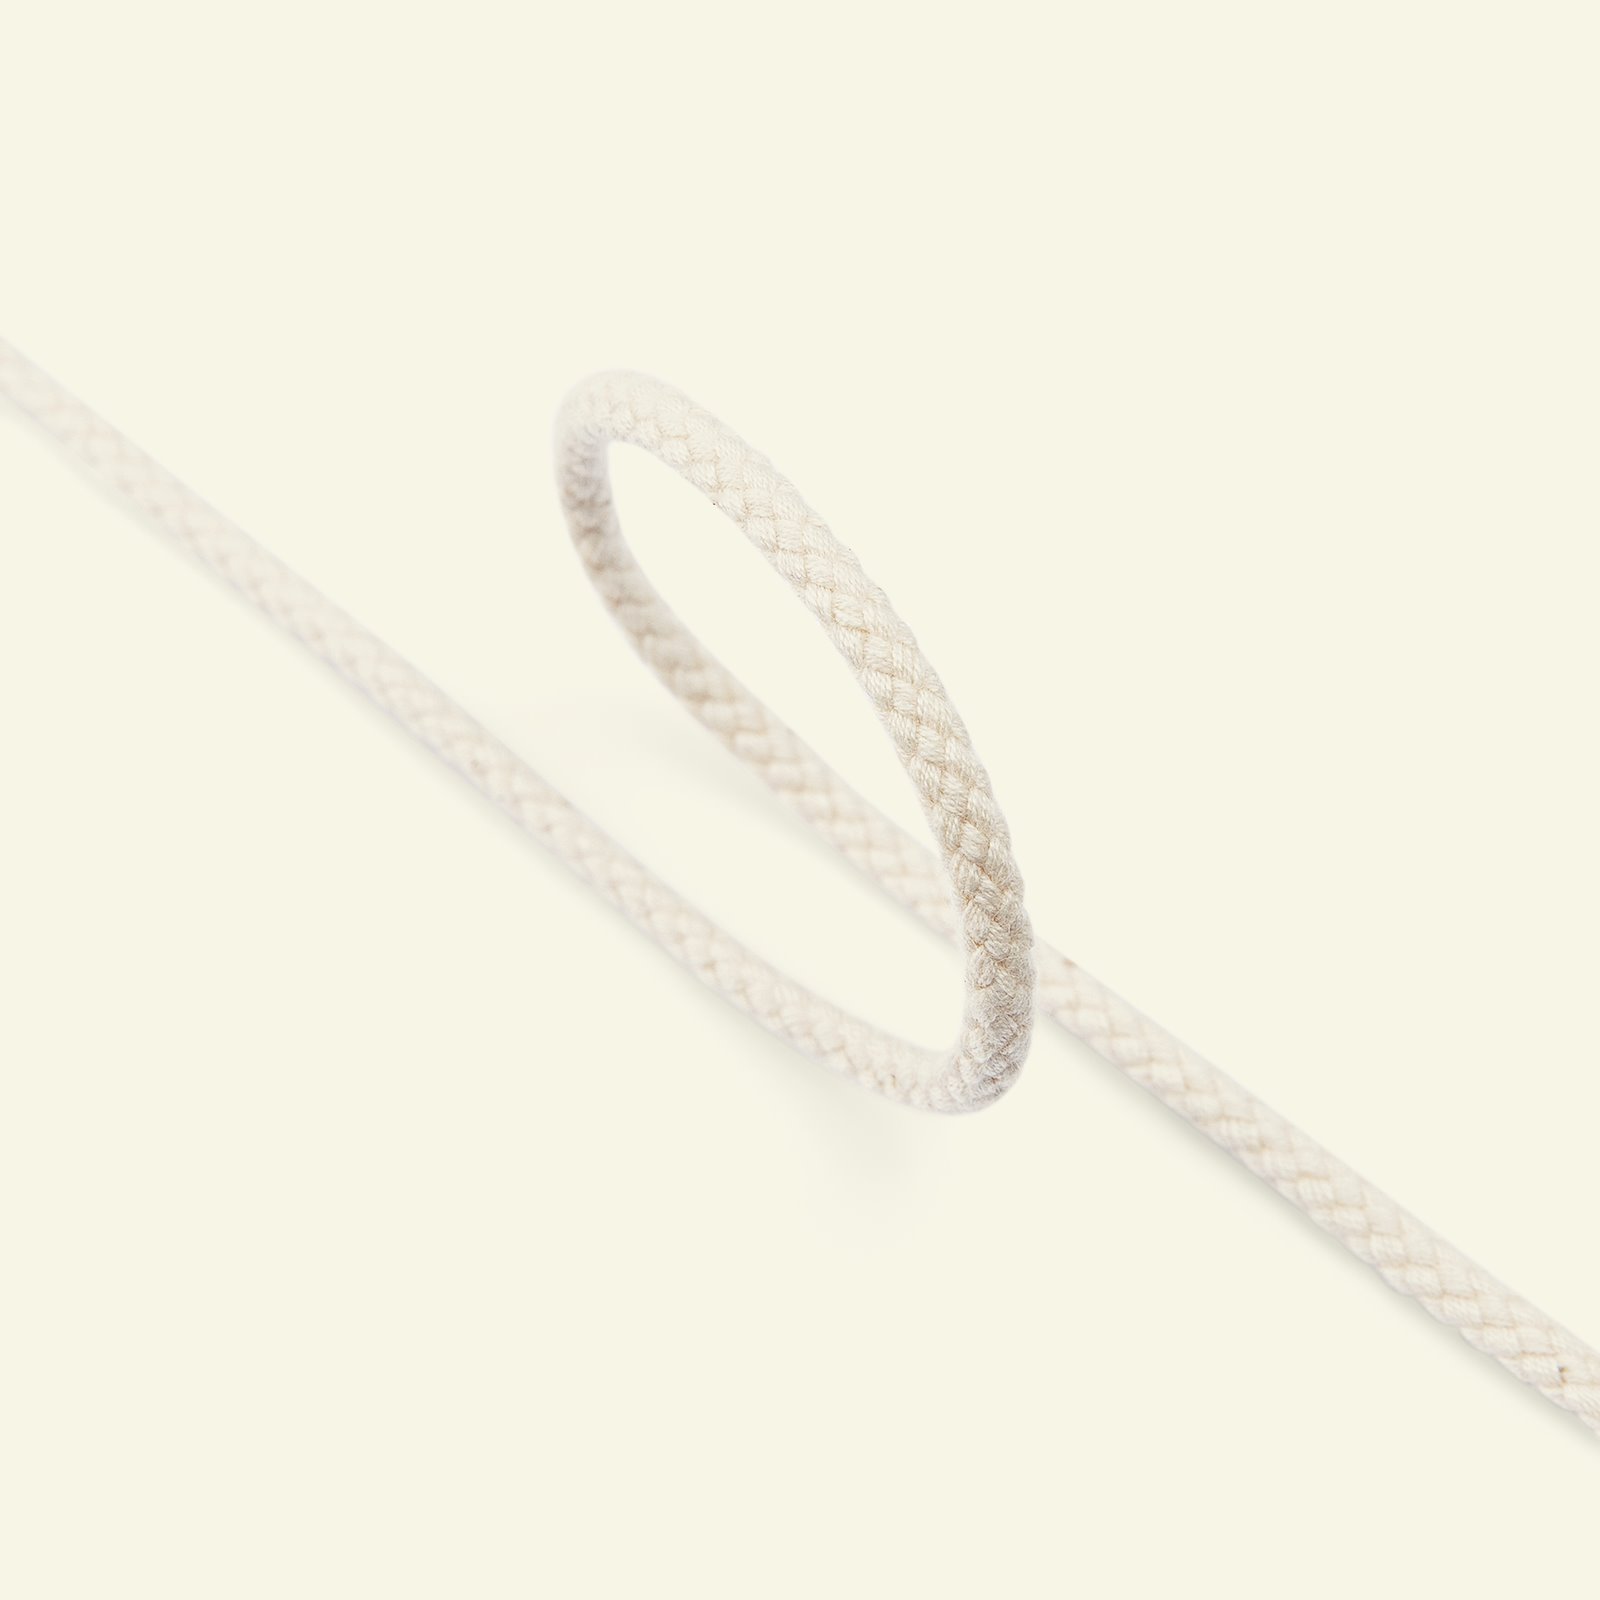 Anorak cord 3,5mm cotton unbleached 5m 75003_pack